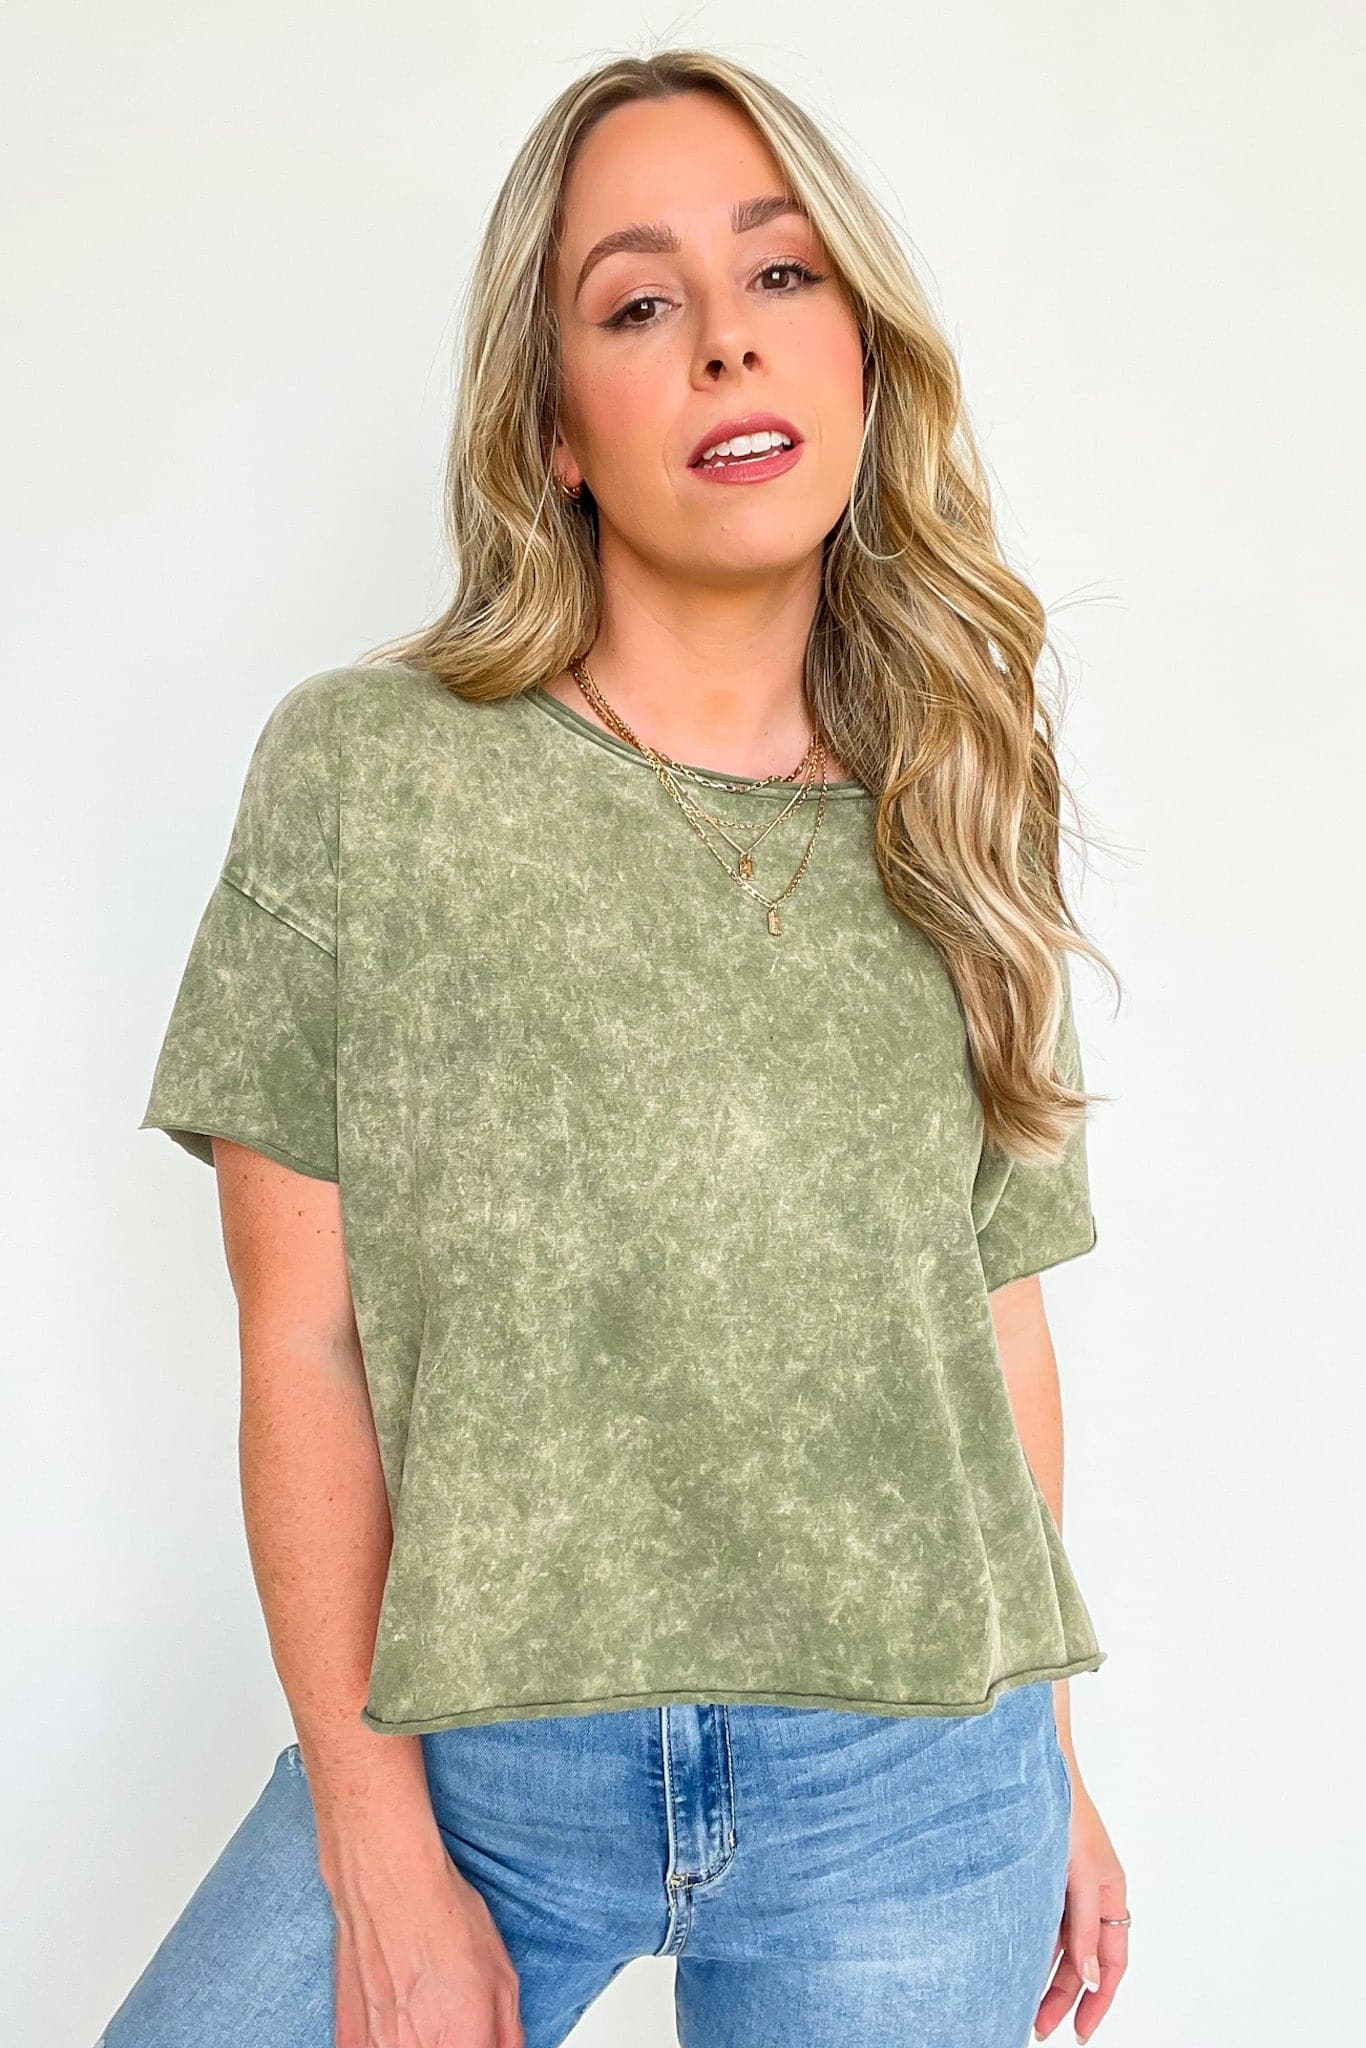 Ash Olive / SM Amorettah Acid Wash Cropped Tee - BACK IN STOCK - Madison and Mallory